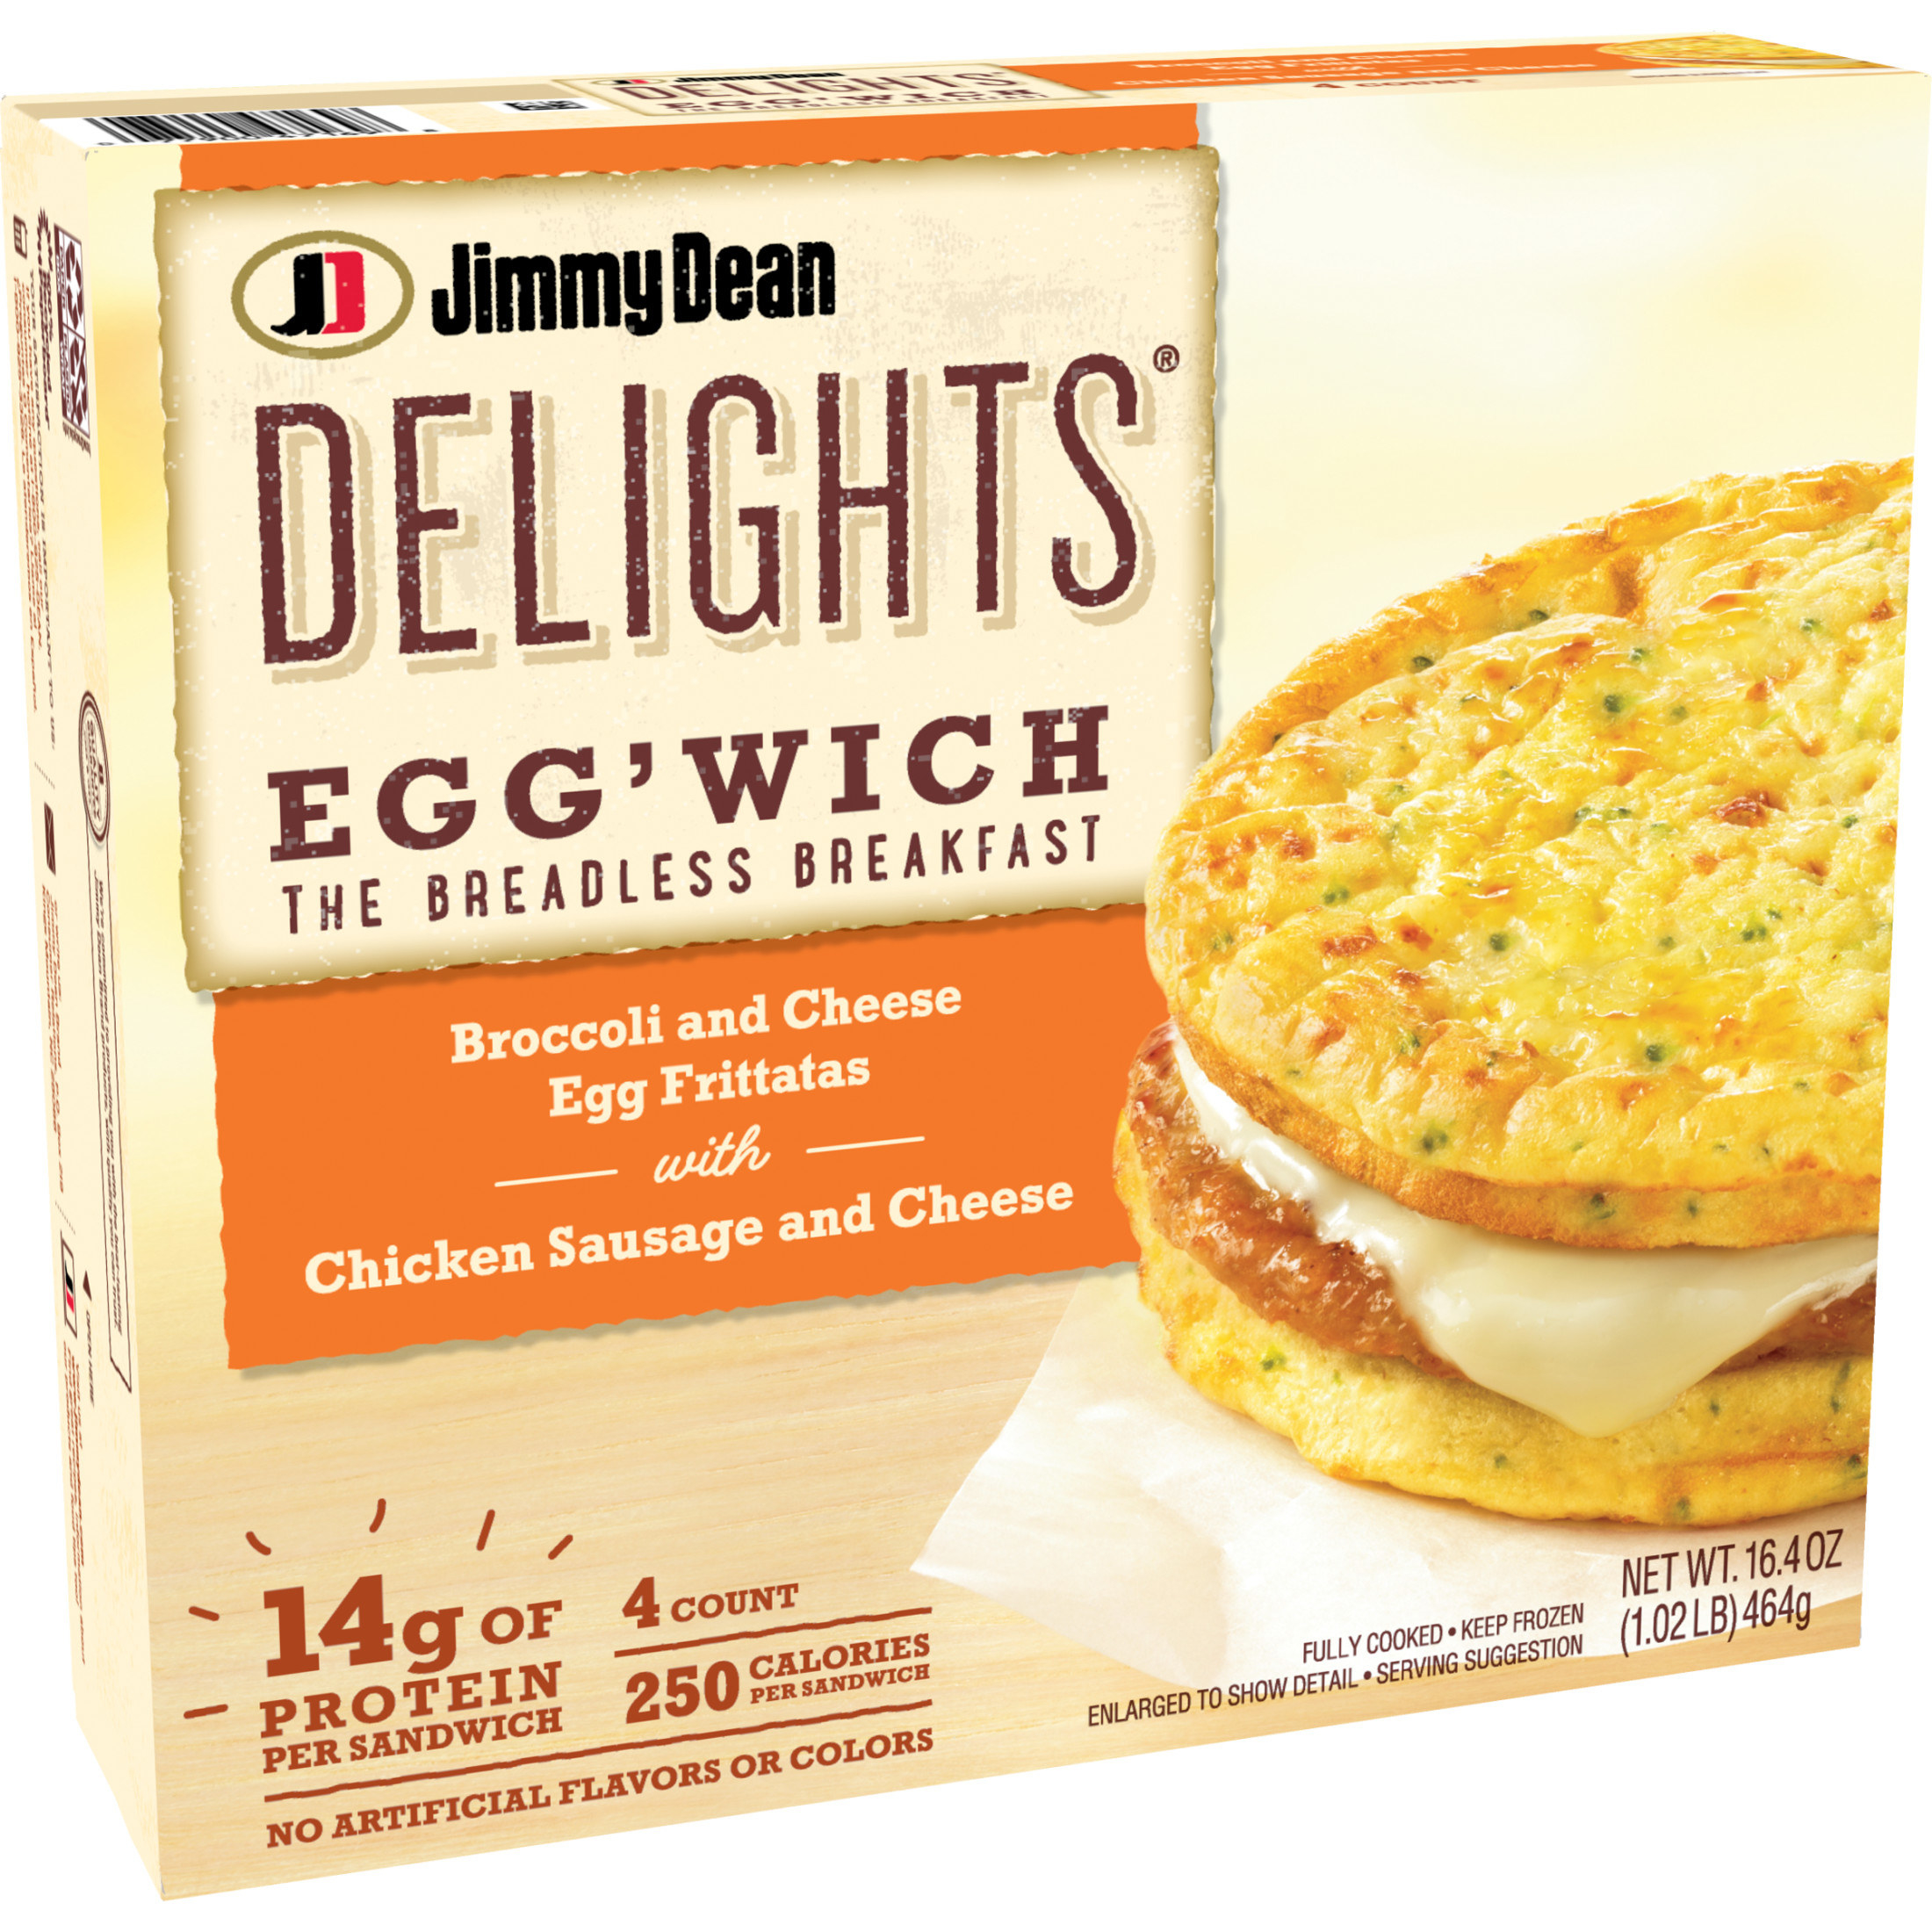 Jimmy Dean breadless broccoli and cheese breadless egg&#x27;wich